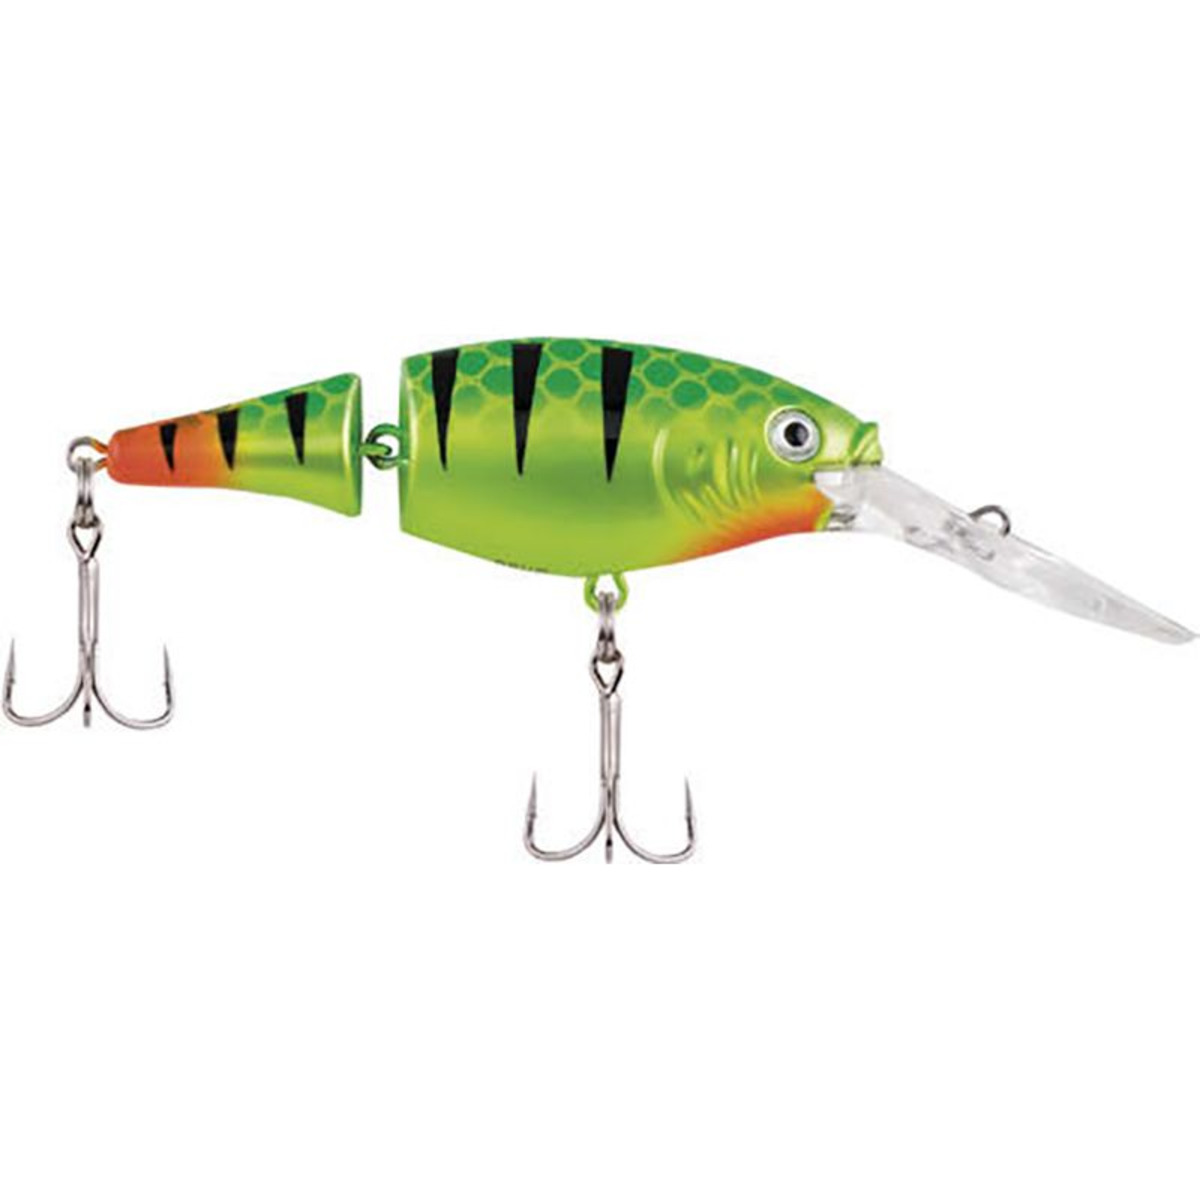 Berkley Flicker Shad Jointed Fire Tail - 7 cm - 8.5 g - Anti-Freeze